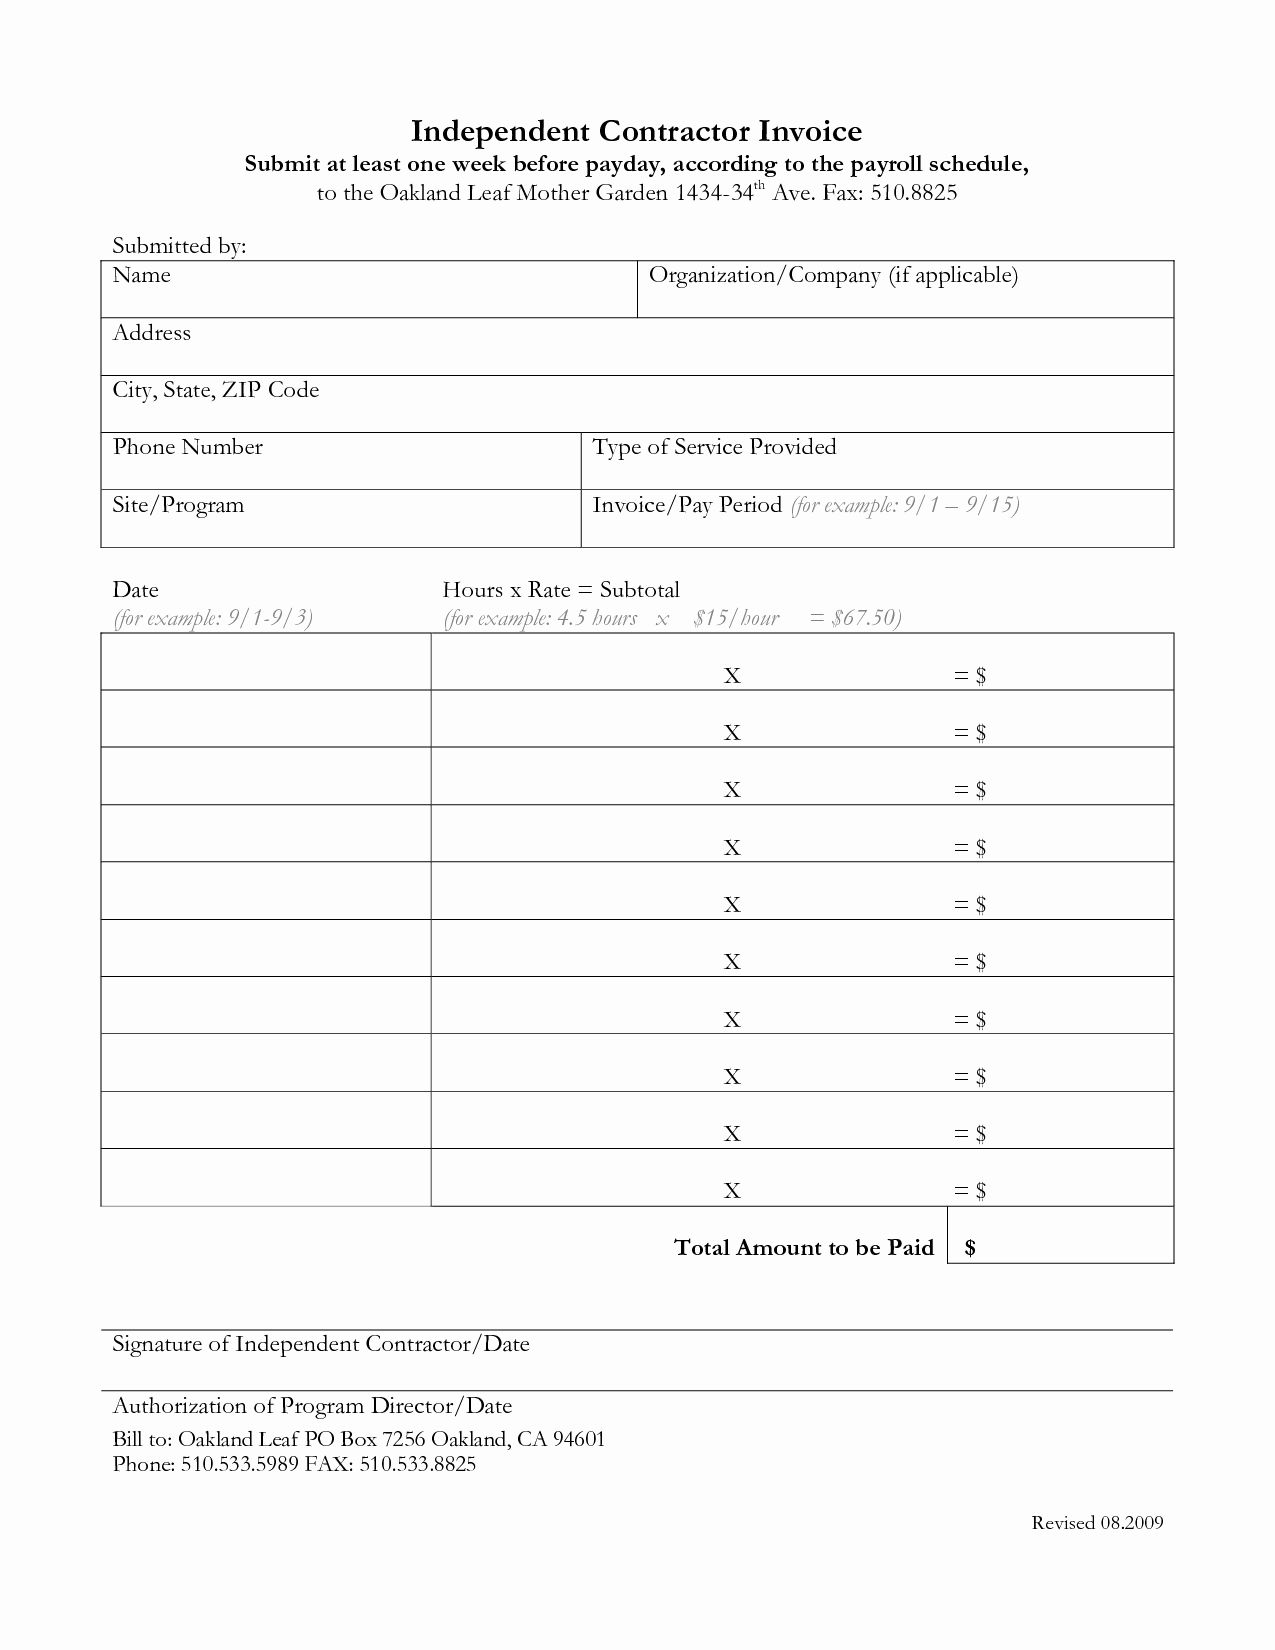 Independent Contractor Invoice Template Best Of Independent Contractor Invoice Template Free